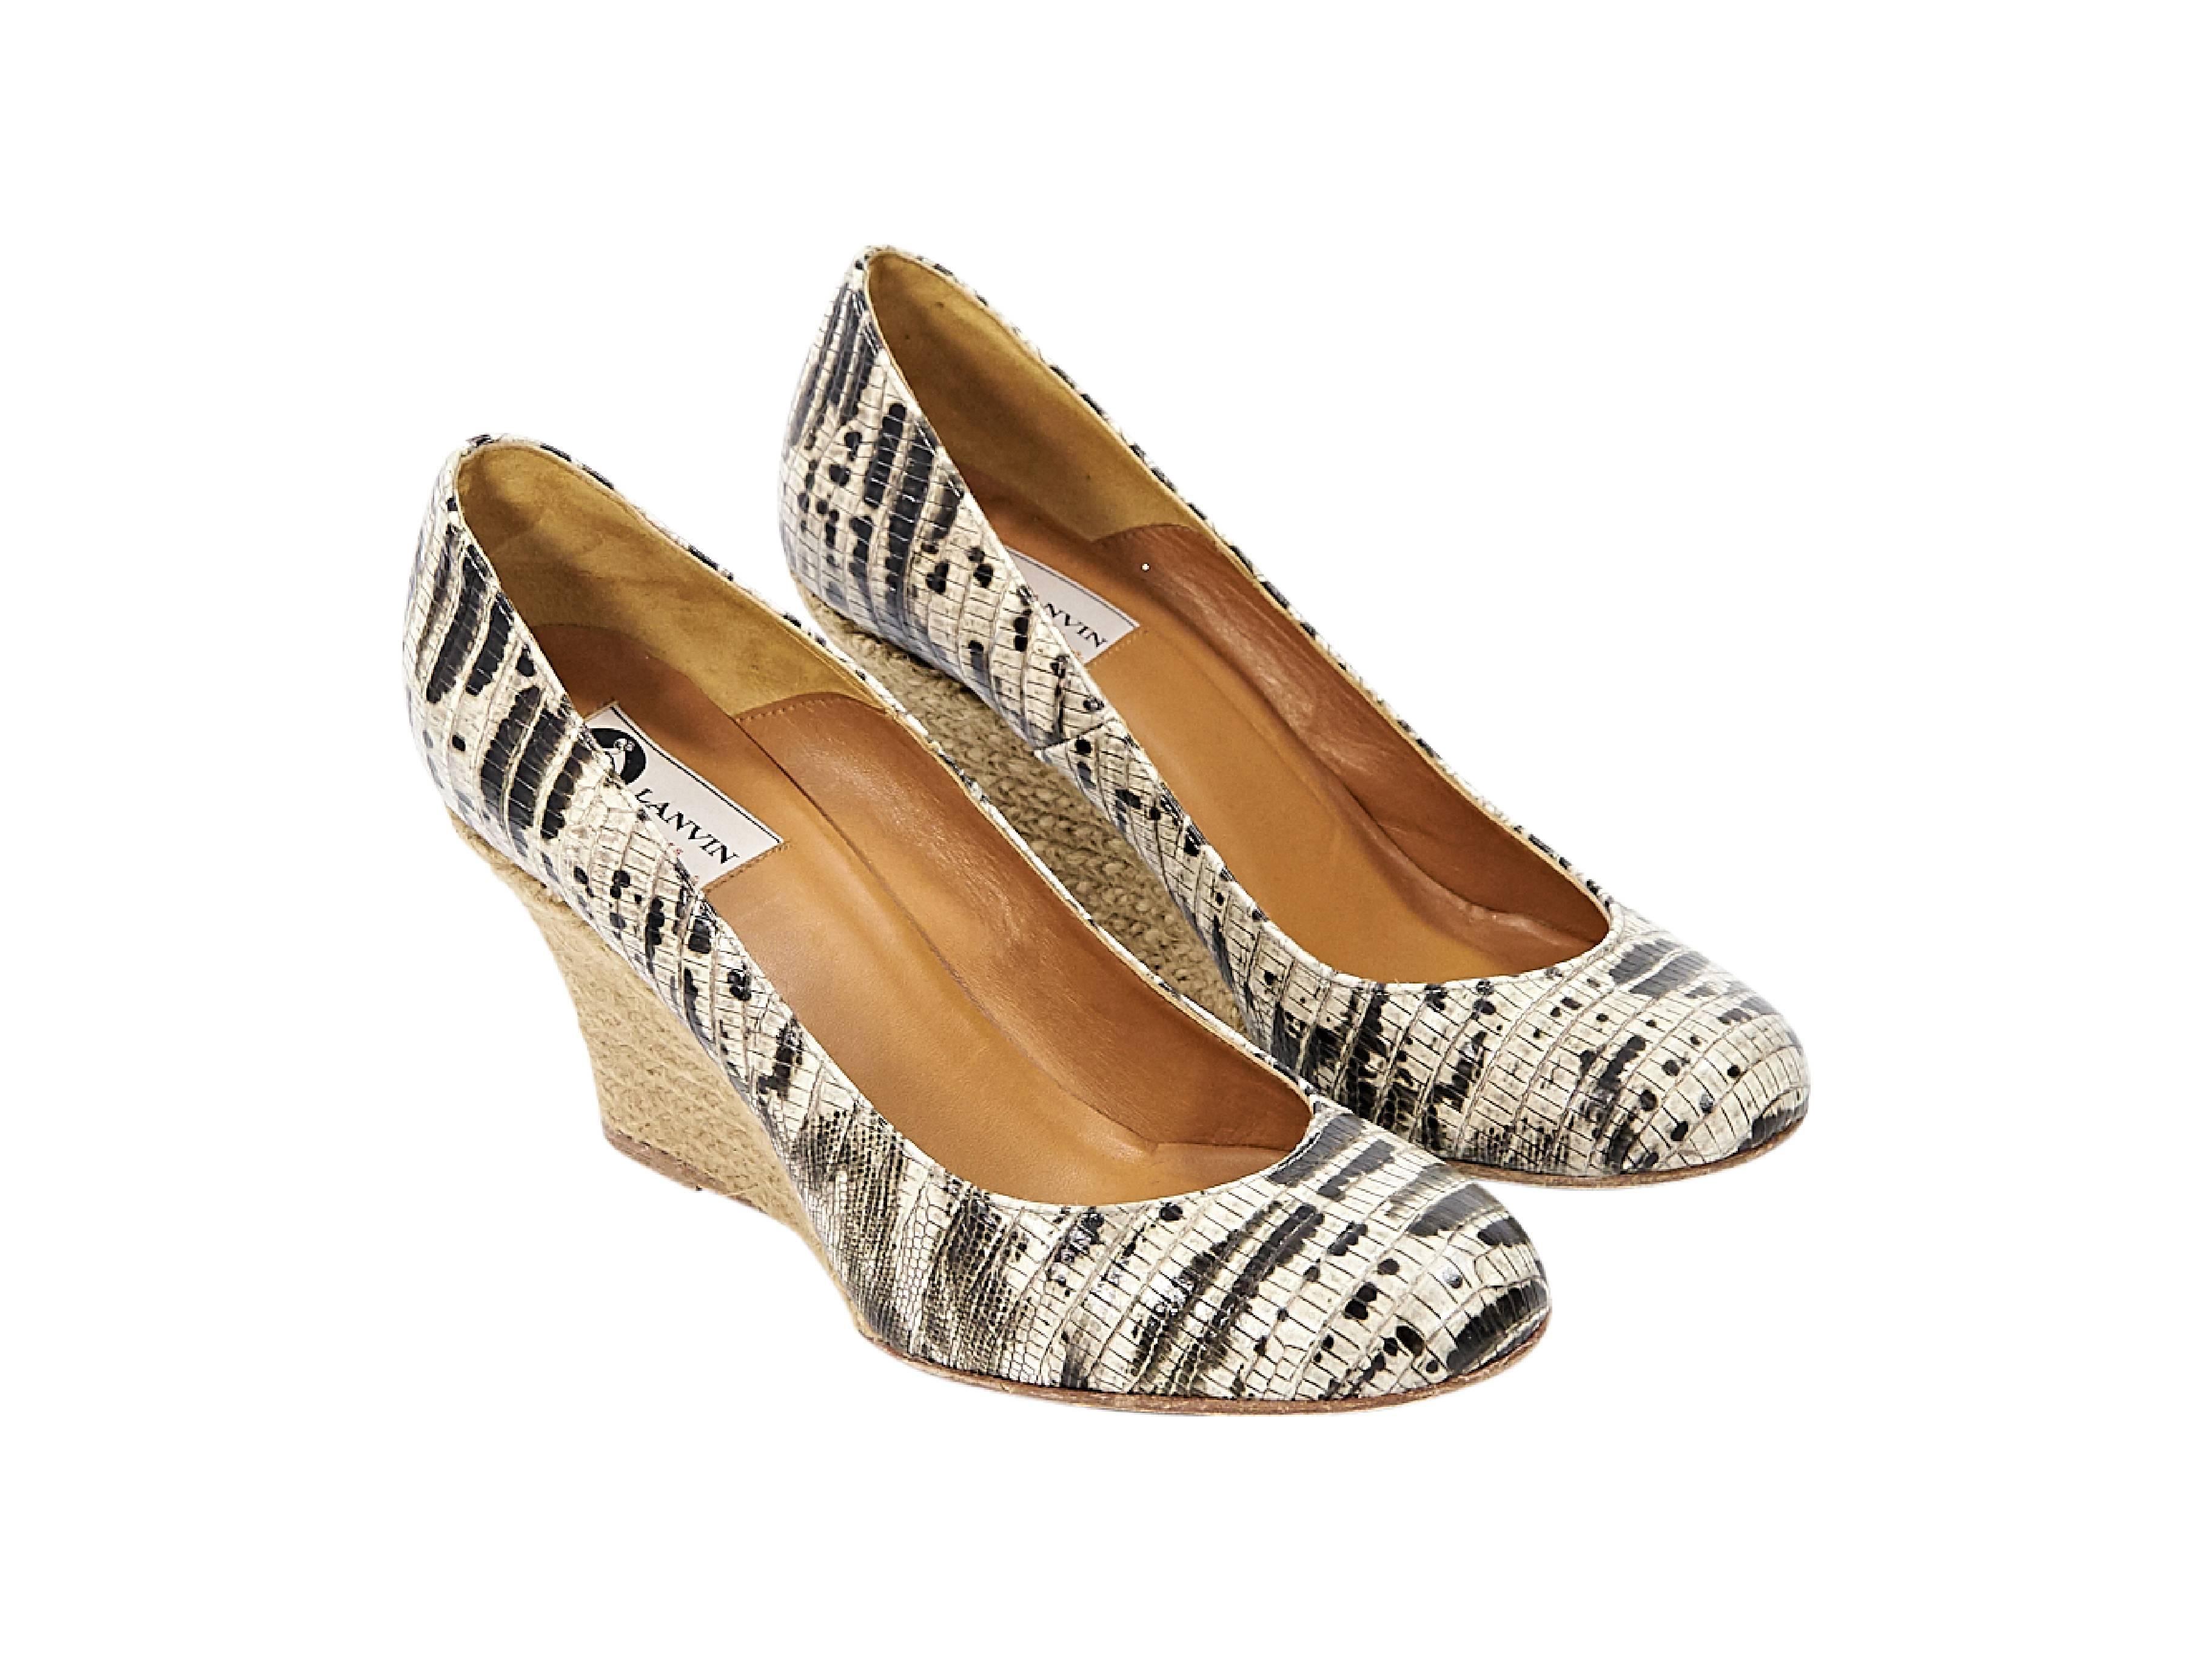 Product details:  Beige snake-embossed leather espadrille wedges by Lanvin.  Round toe.  Braided jute covers wedge.  Slip-on style. Size 8
Condition: Pre-owned. Very good.

Est. Retail $ 428.00
